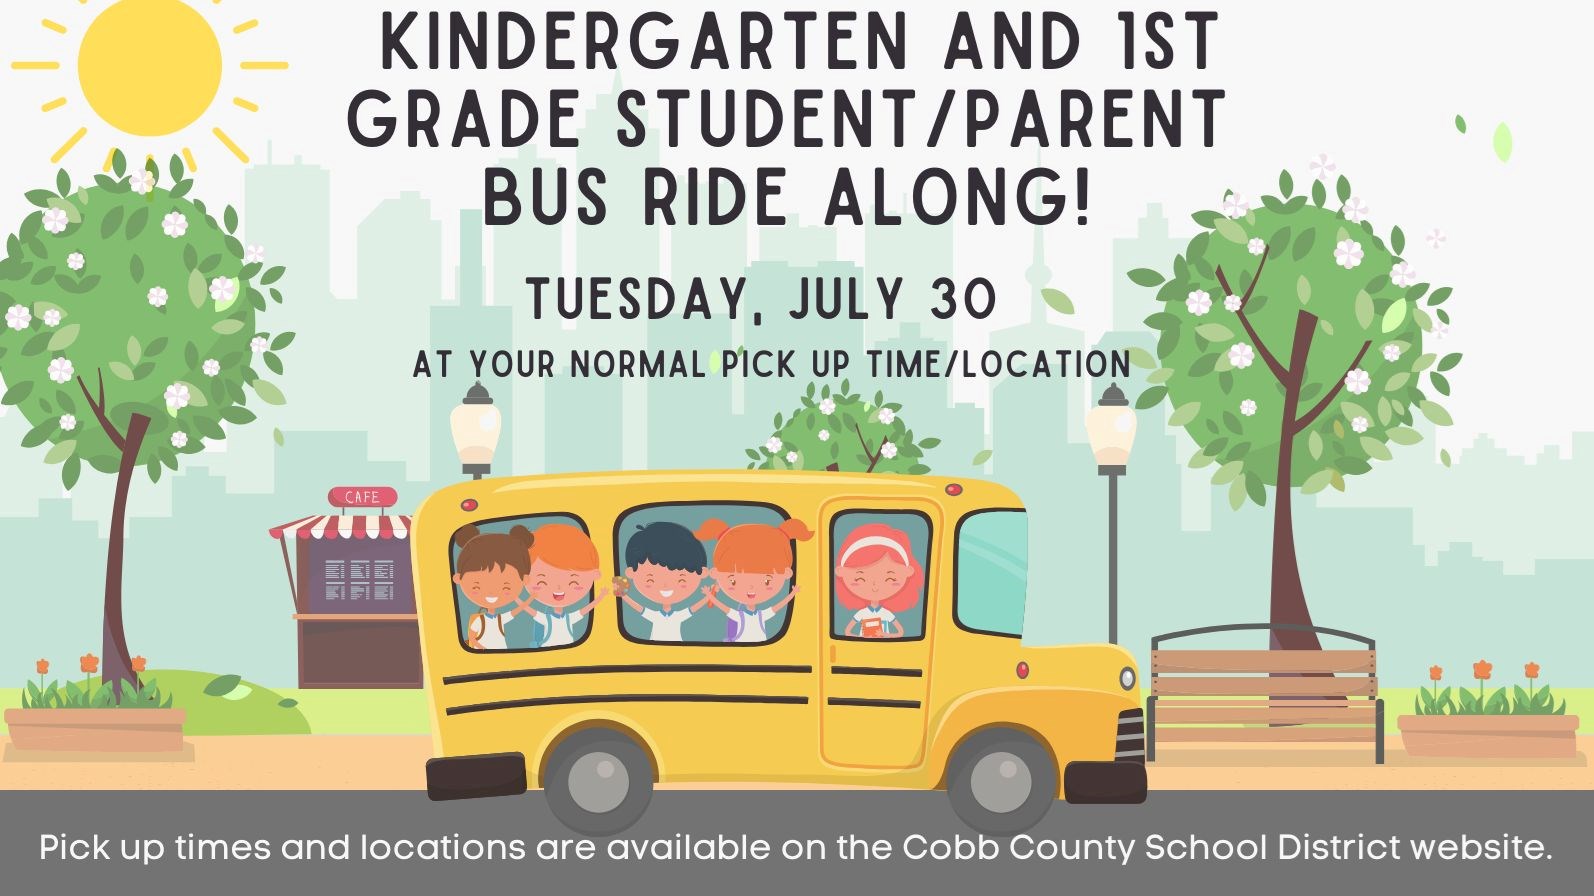 Kindergarten and First Grade Student and Parent Bus Ride Along on Tuesday, July 30